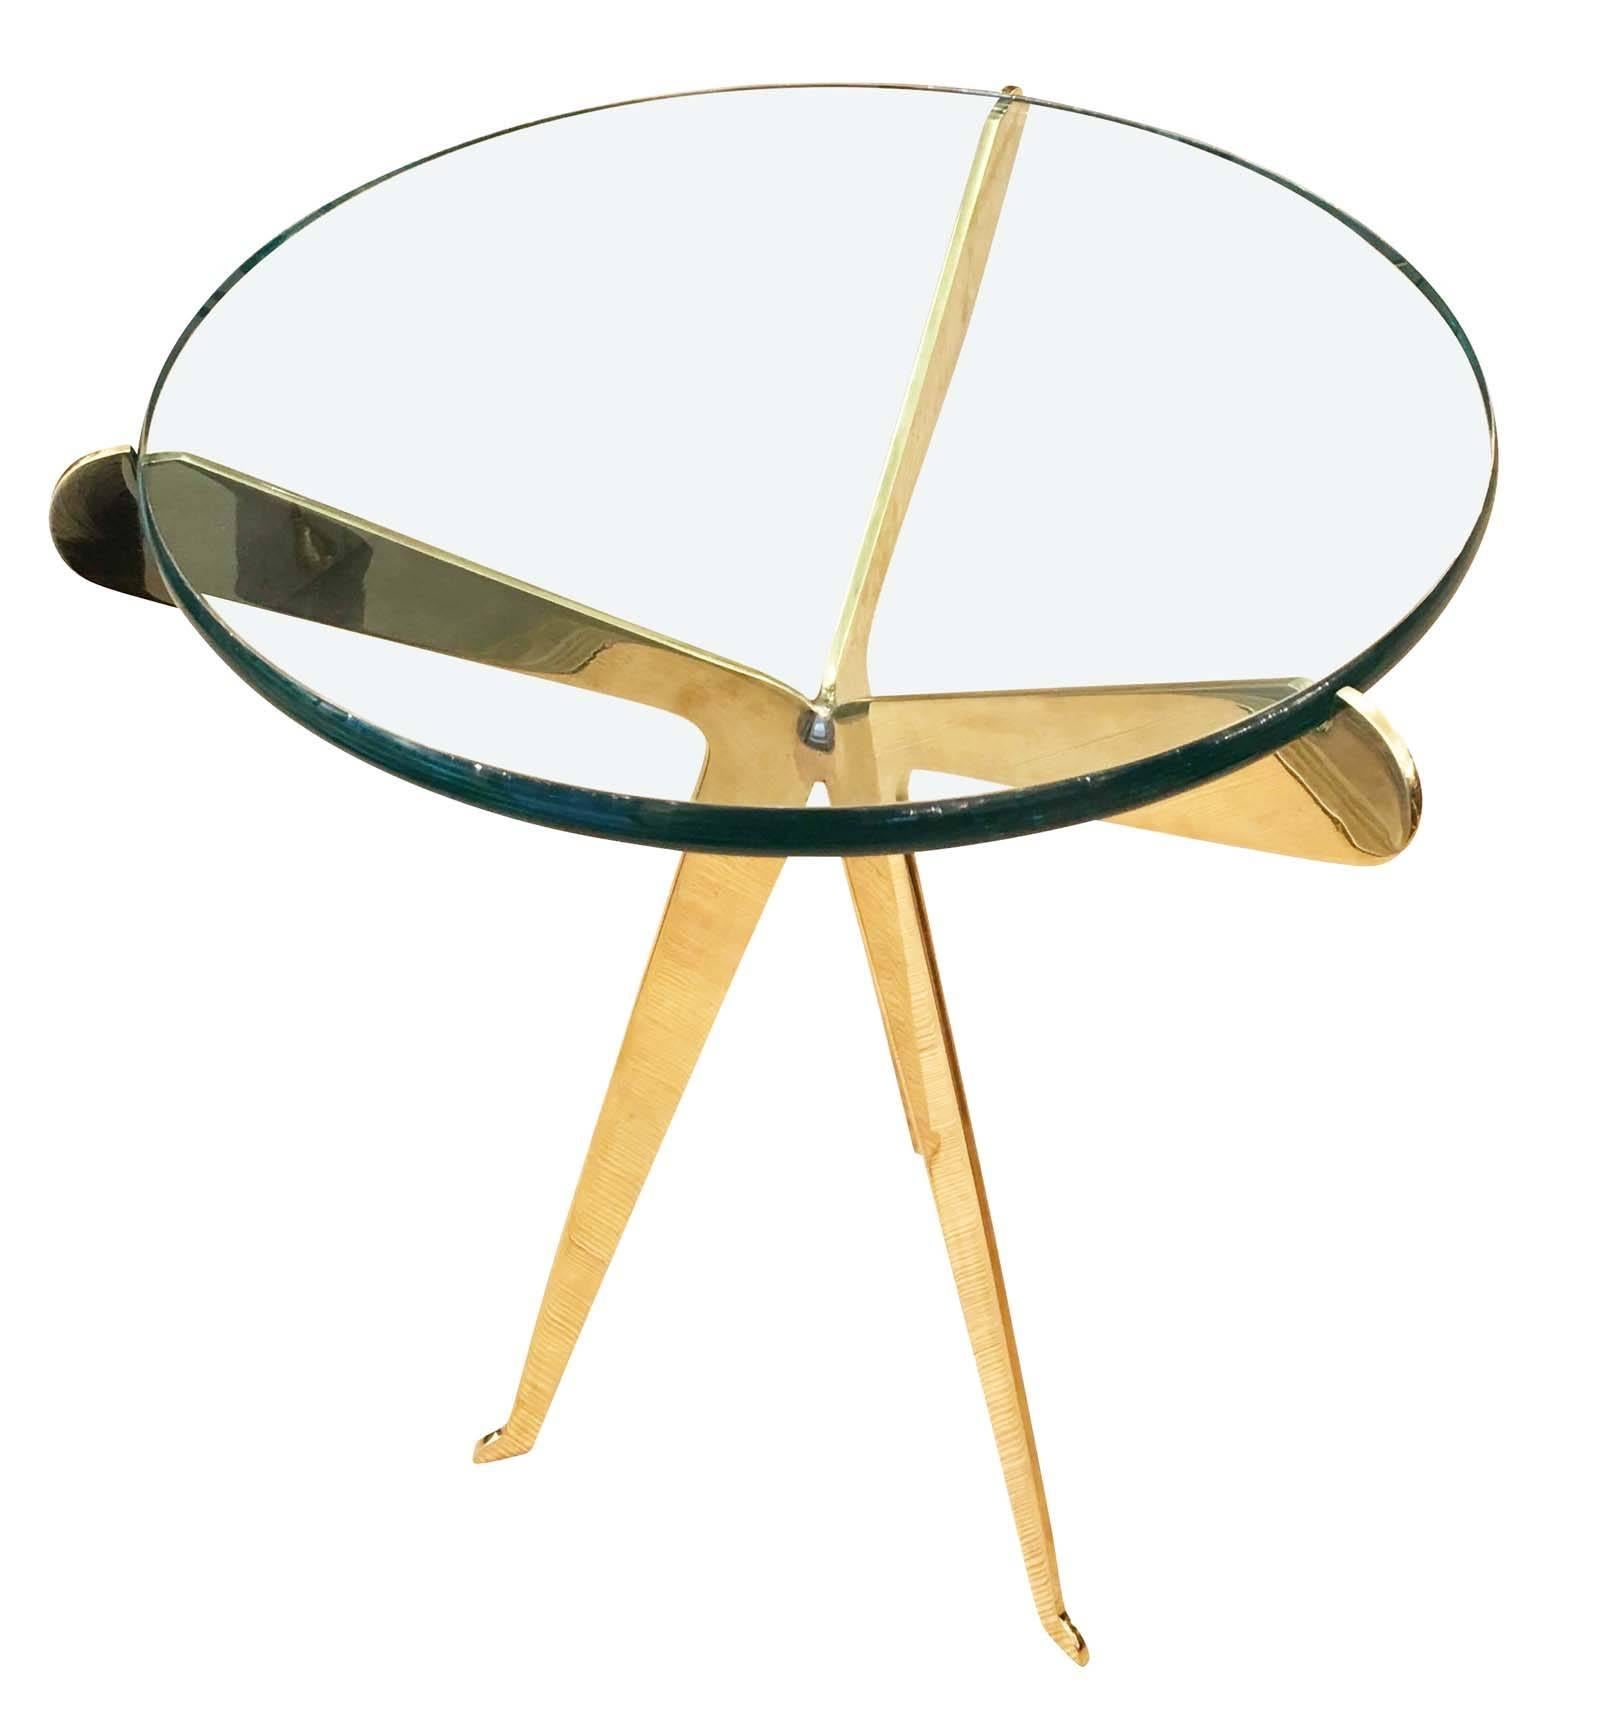 Large brass side table or gueridon with three legs and a thick glass top with rounded edges. Designed by Gaspare Asaro and manufactured in limited quantities. Also available nickel plated as well as in a smaller size.
